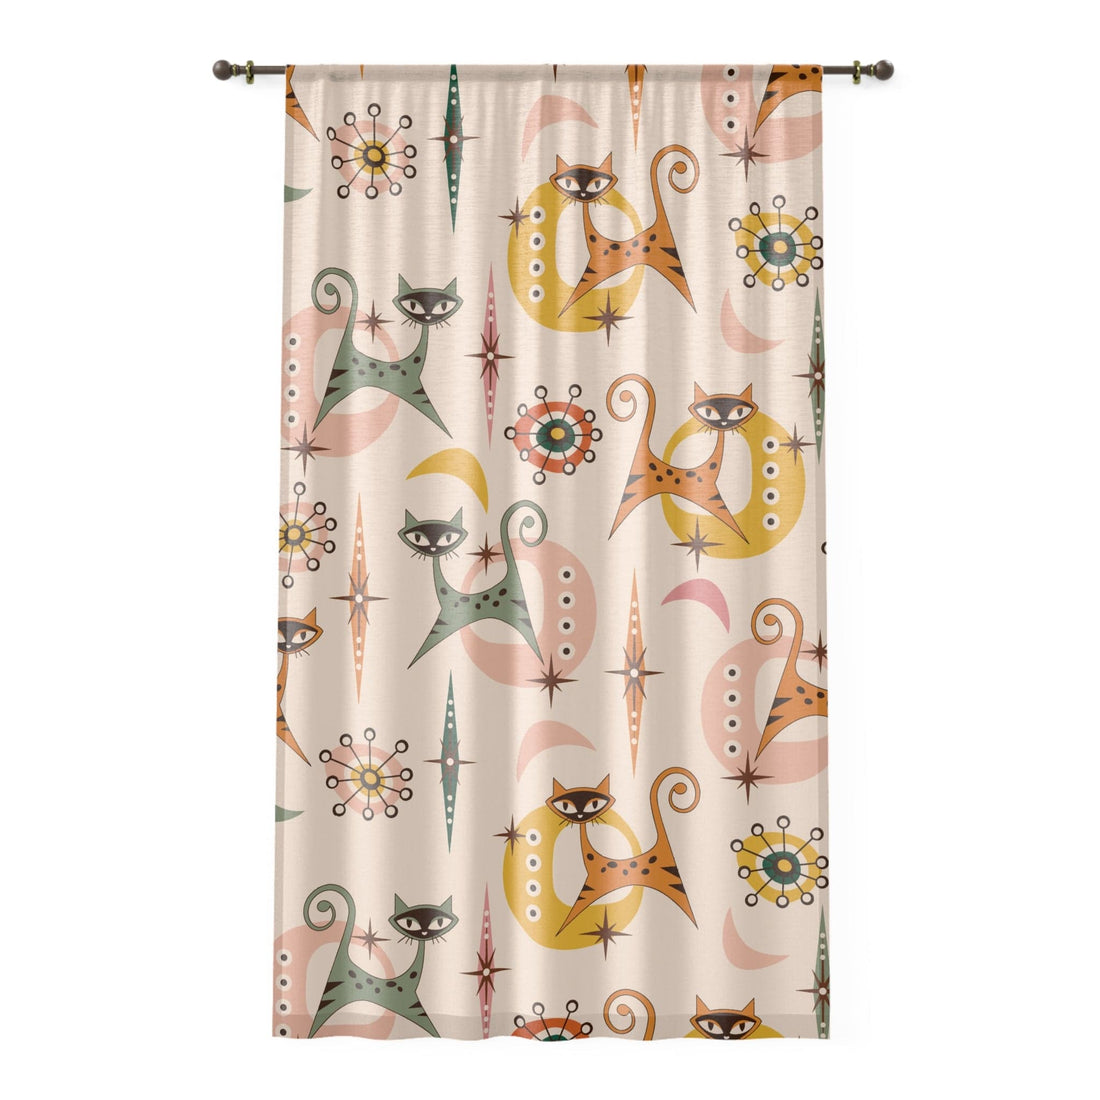 Printify Mid Century Modern Atomic Cat Window Curtain, Retro Kitty Design, Vintage 50s Vibe, Groovy Drapery Panel, Atomic Age Whimsical Decor Home Decor Sheer / White / 50&quot; × 84&quot; 22353217390251553540